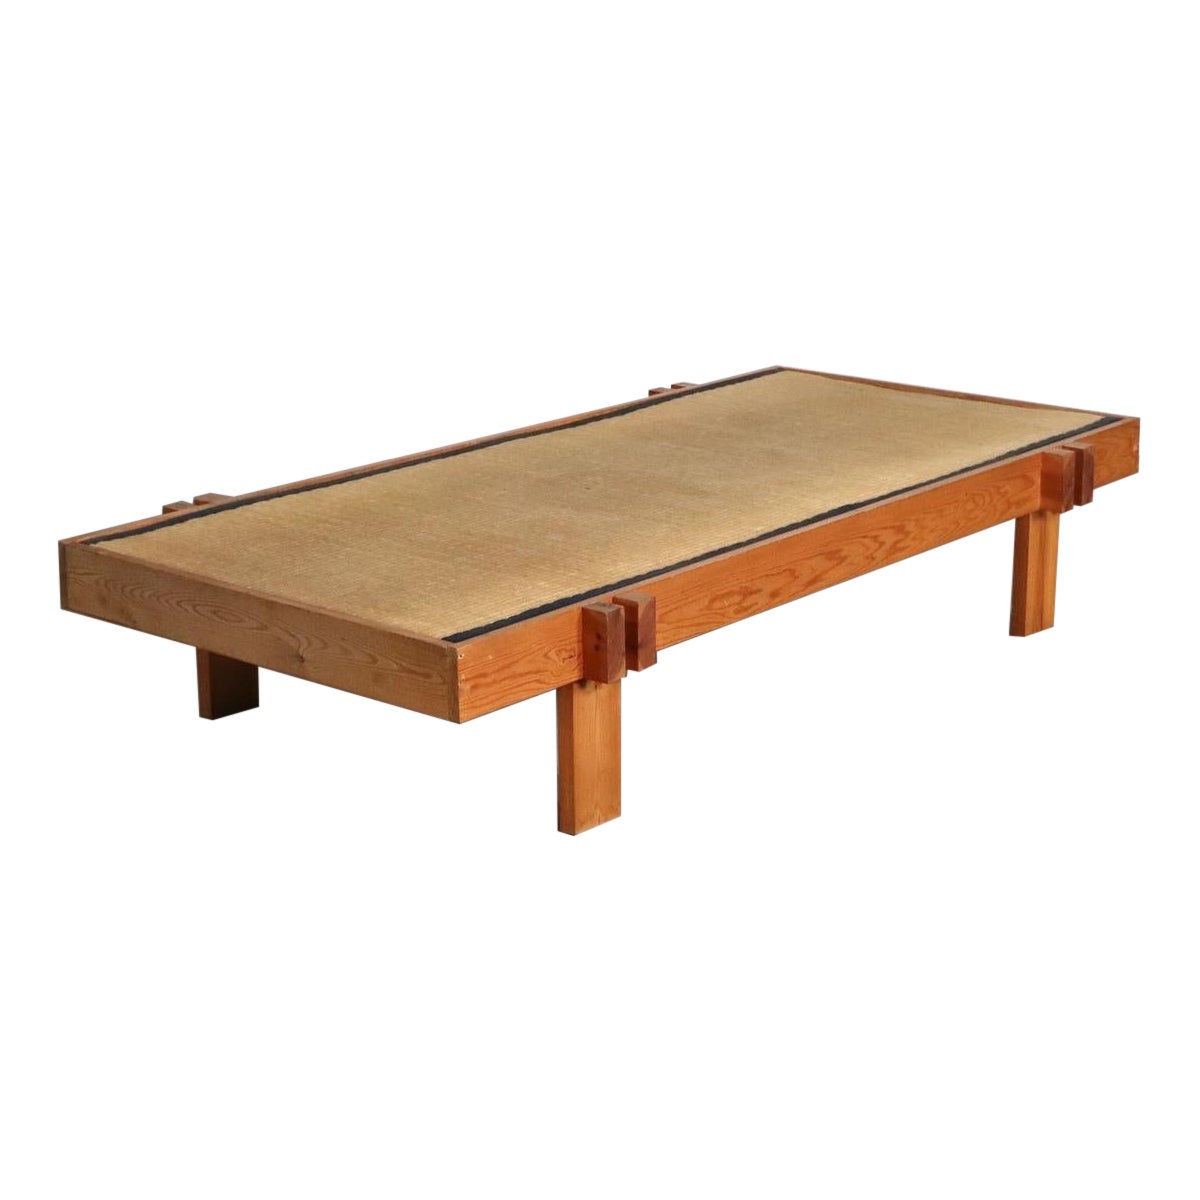 Midcentury Japanese Coffee Table In Wood And Seagrass, Japan, 1960s For Sale